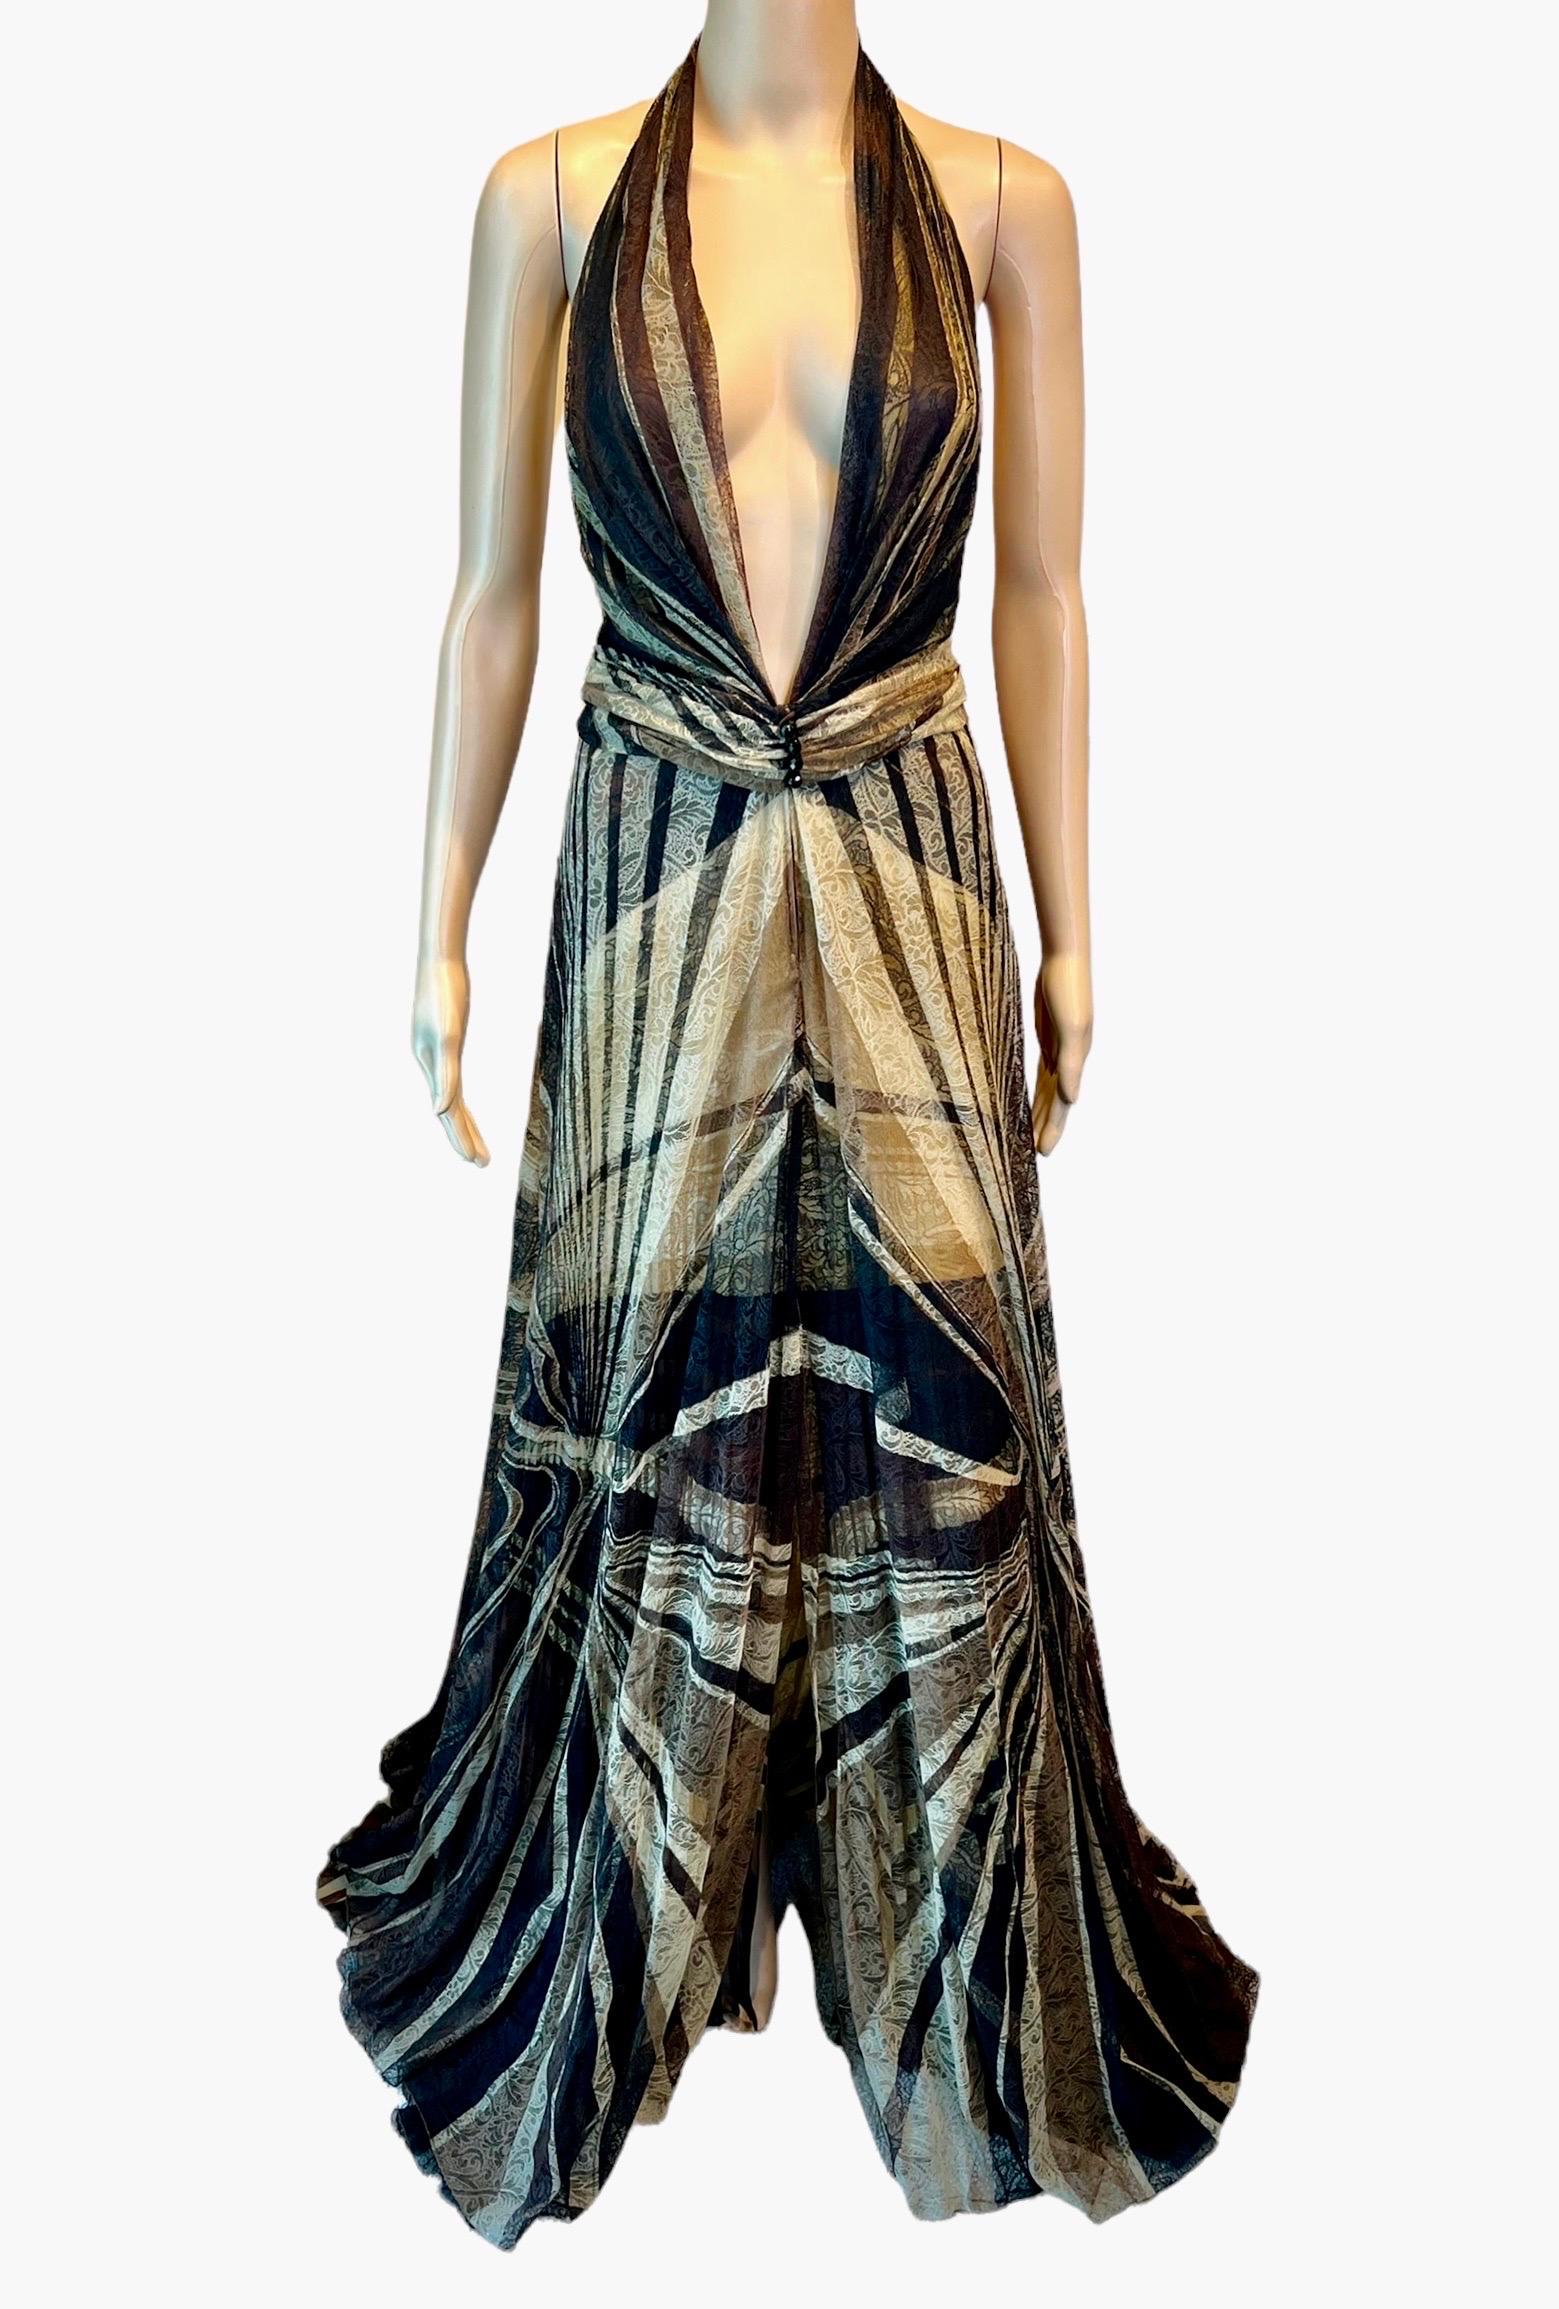 Black Gianni Versace F/W 2000 Runway Plunging Lace Silk Backless Evening Dress Gown For Sale